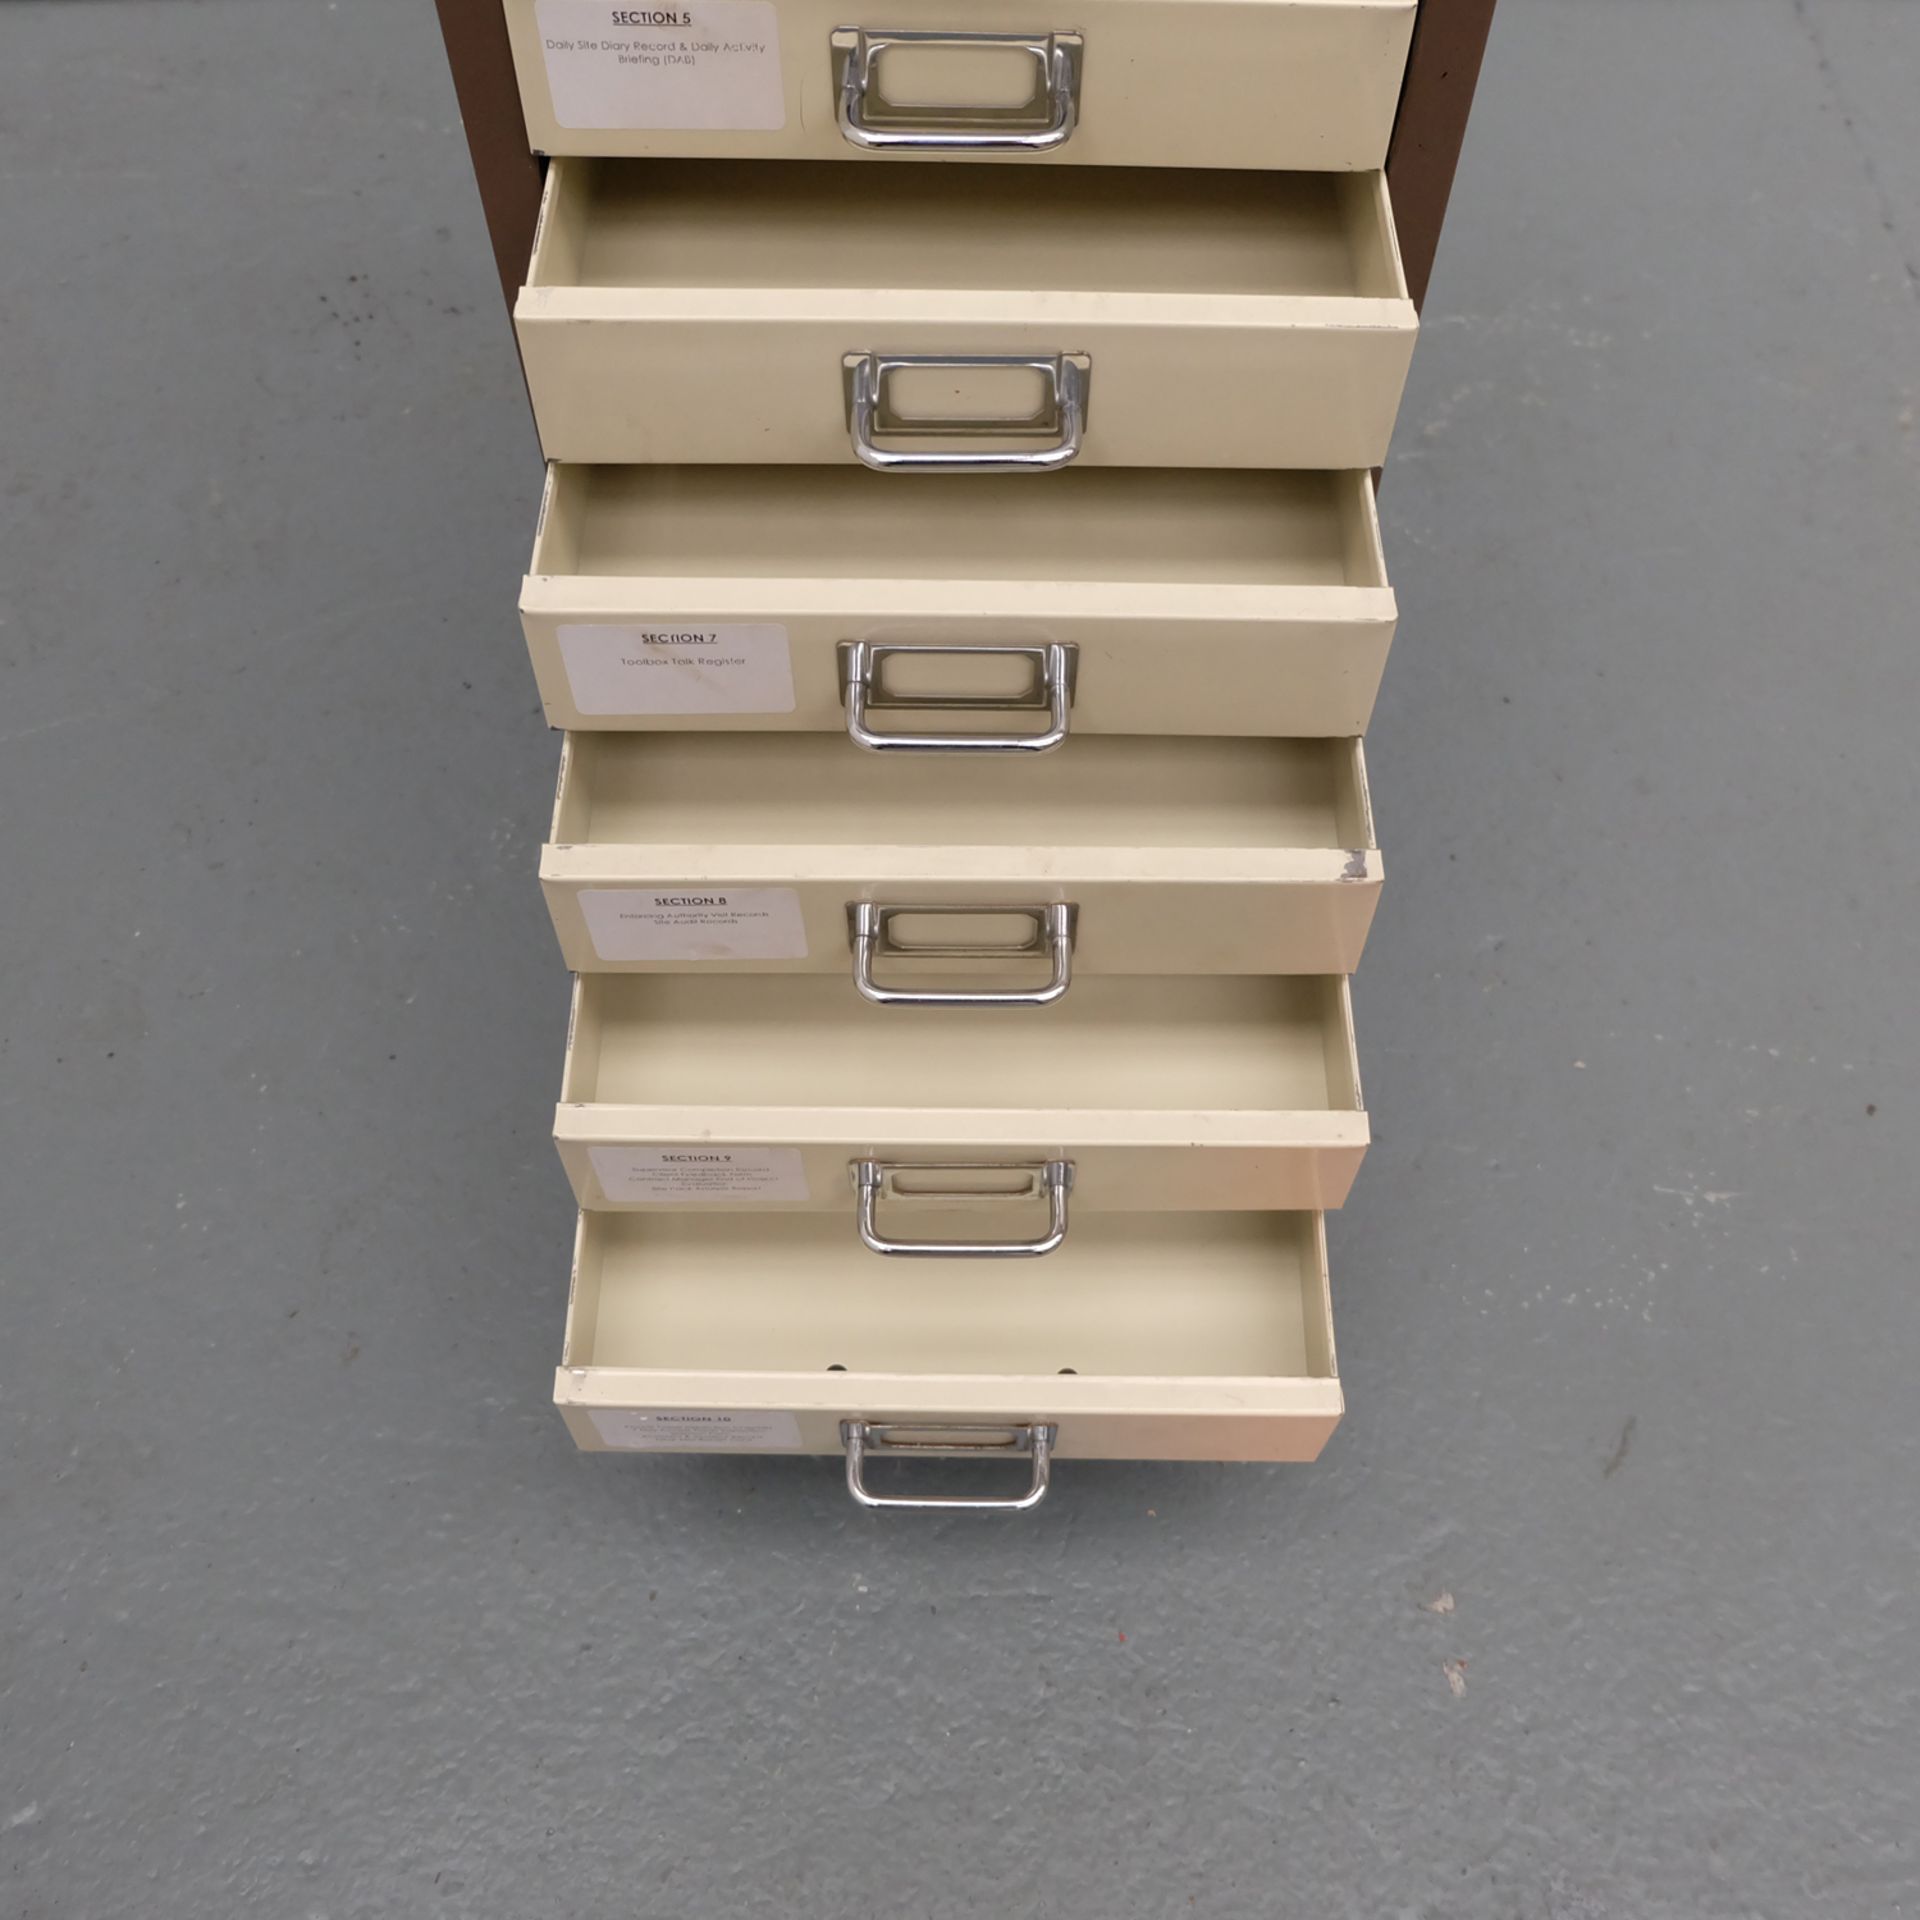 BISLEY Set of Drawers. 280mm x 410mm x 675mm High Approx. - Image 6 of 6